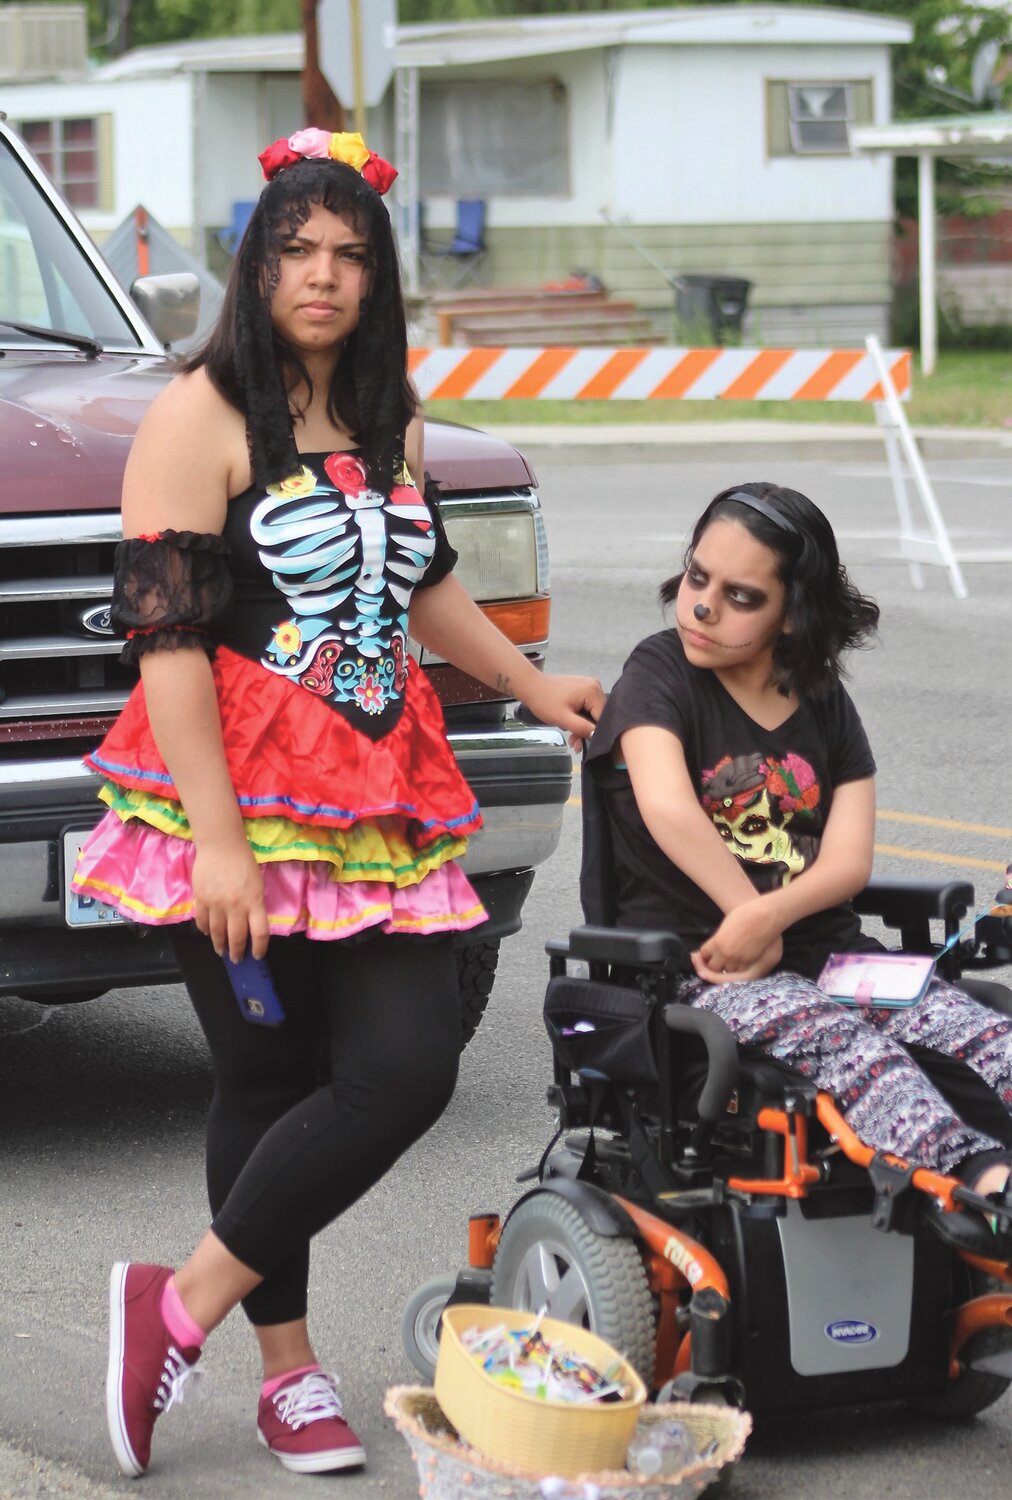 Berenice Gamez, left, and her sister, Maritza Gomez, showed up in costume for the festivities.